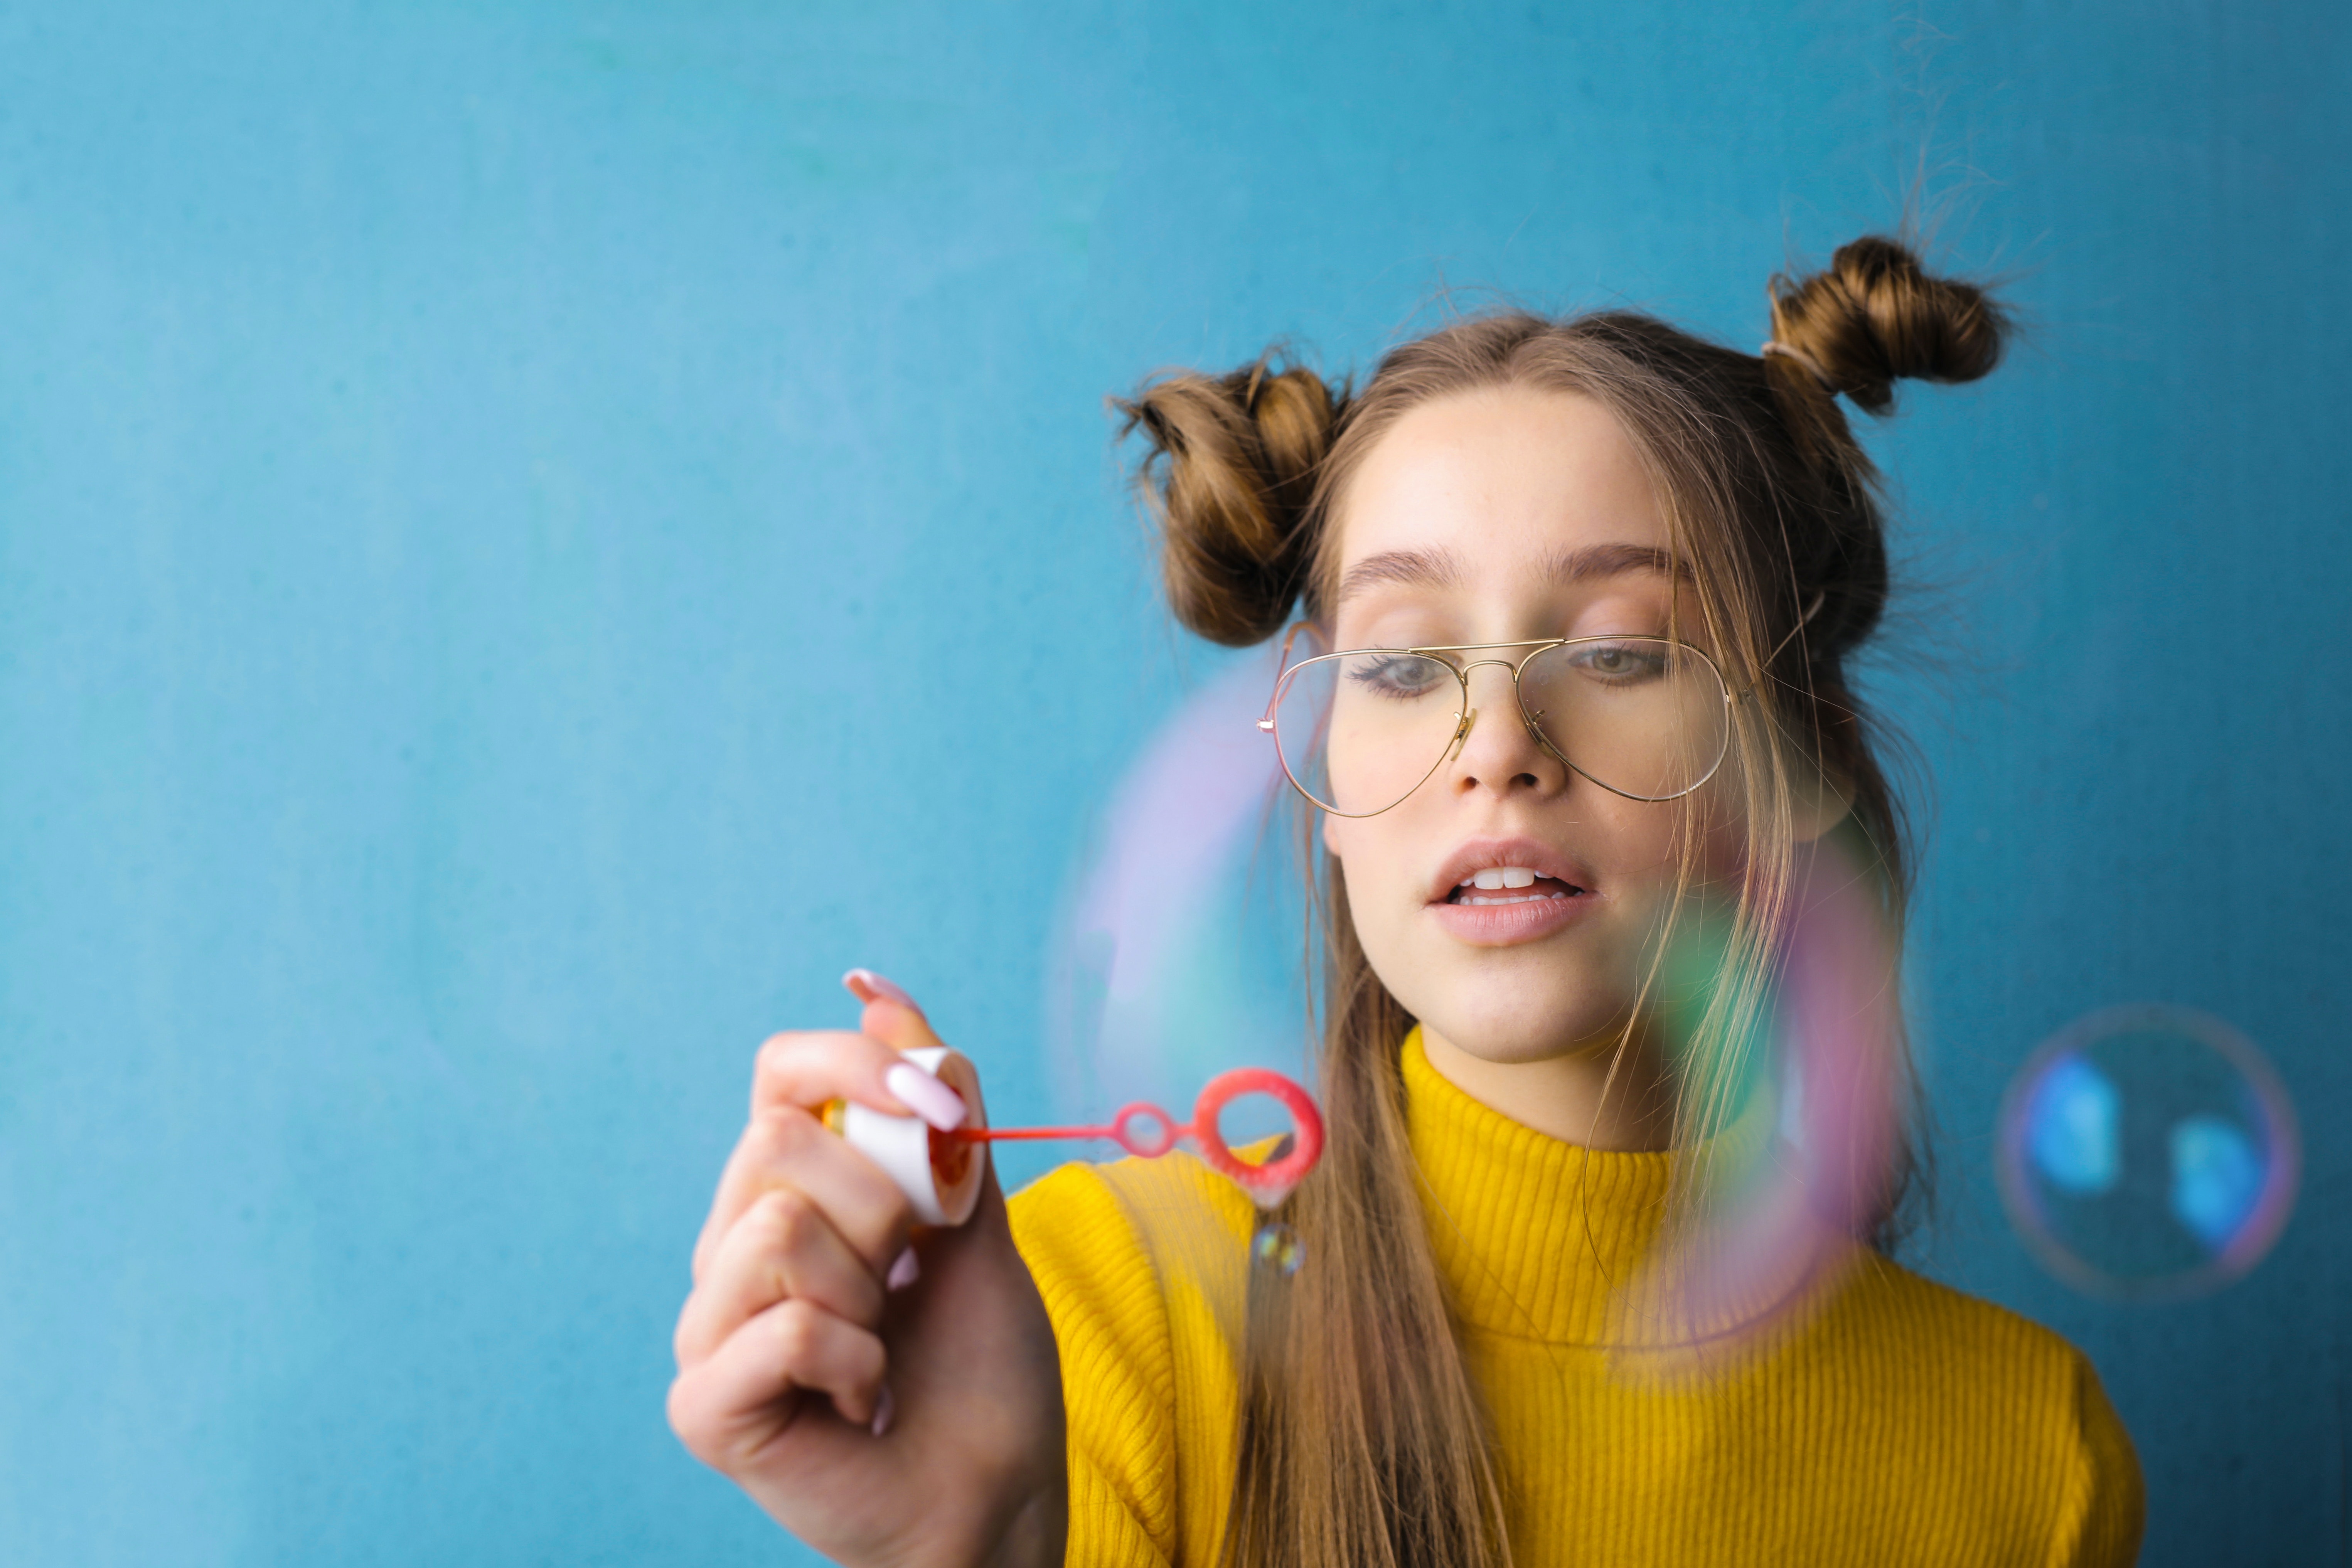 A woman playing with bubbles. | Source: Pexels